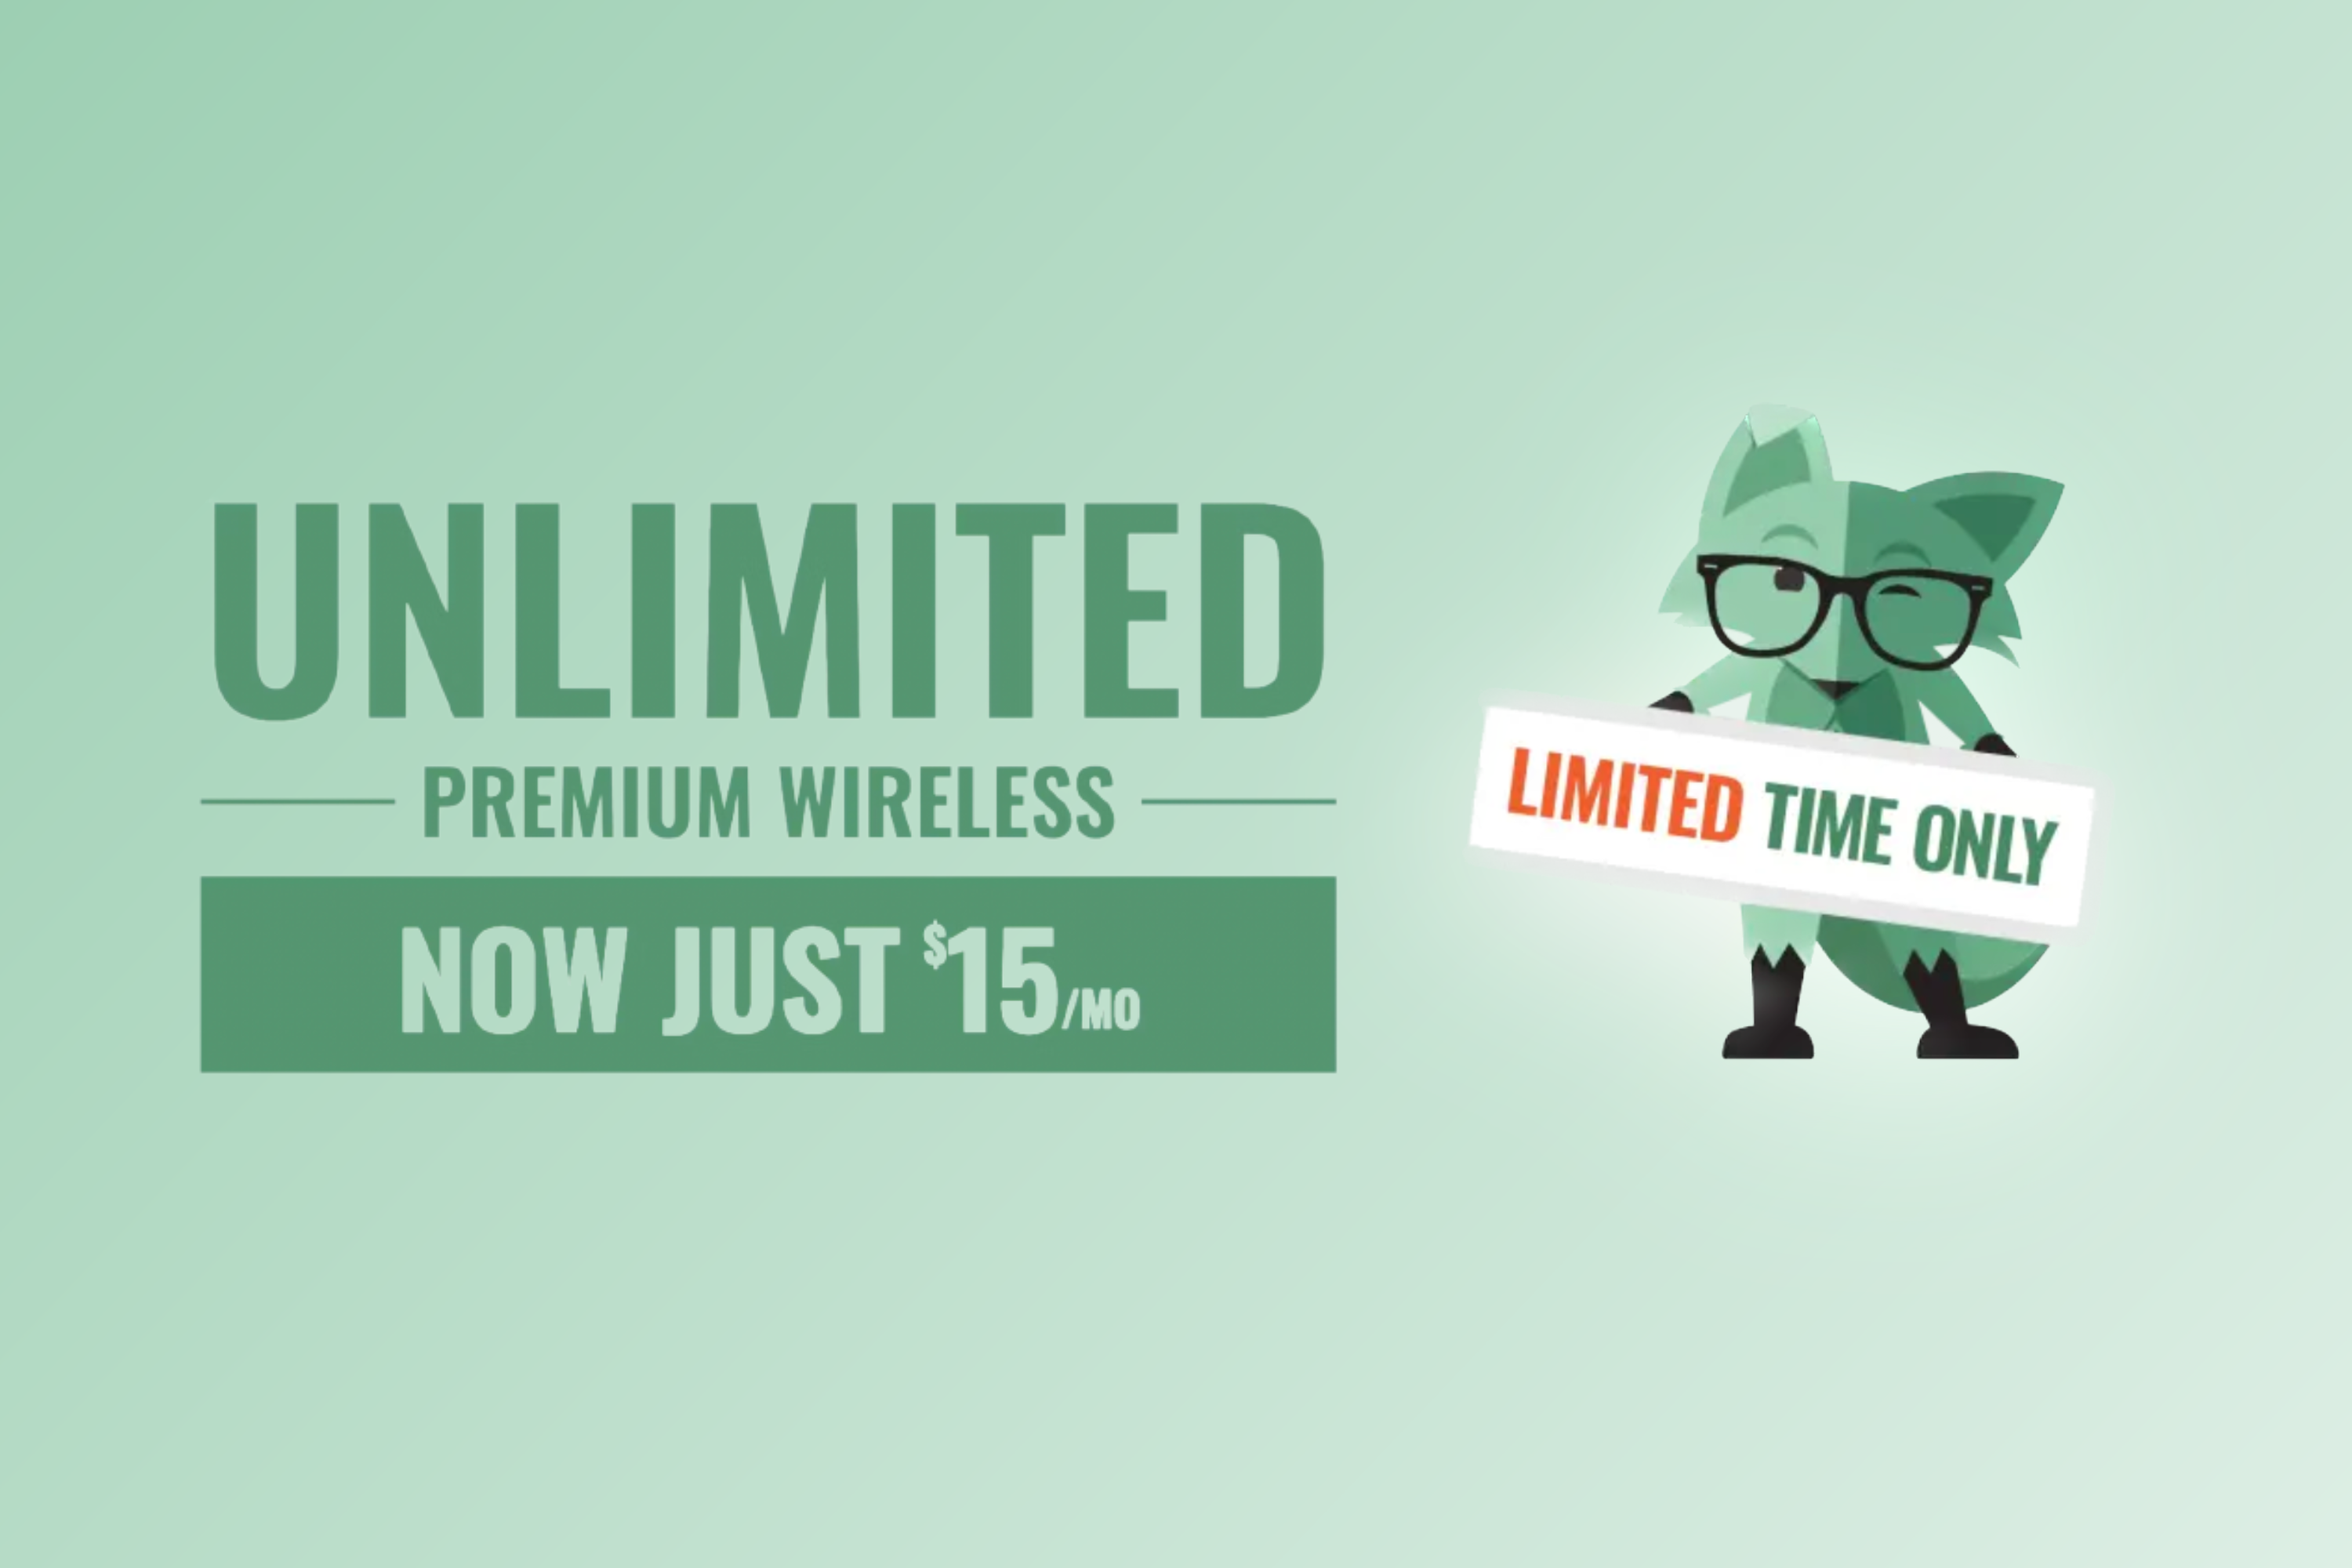 Get an unlimited 3-month Mint Mobile plan for just $45